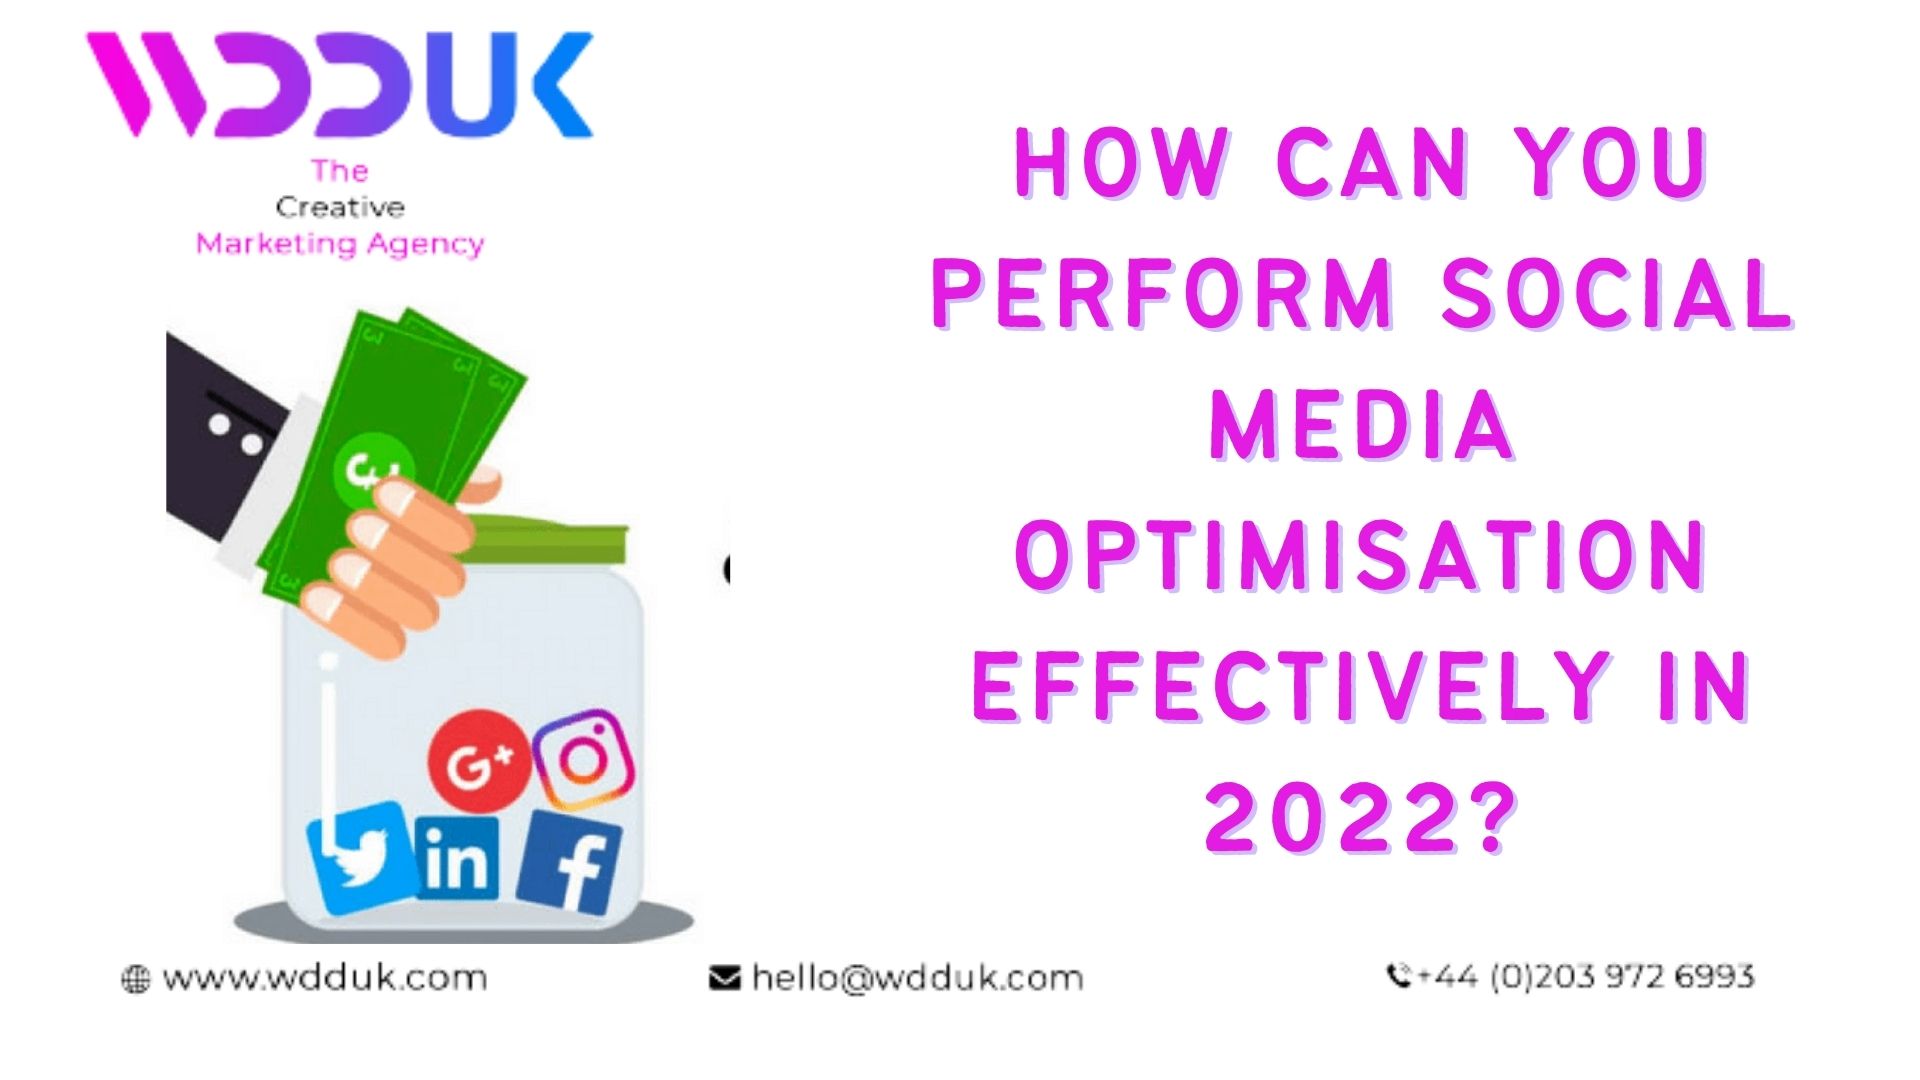 WOU HOW CAN YOU
So PERFORM SOCIAL

&gt; MEDIA
OPTIMISATION

: EFFECTIVELY IN
5 20227?

&amp; wwwwdduk.com hello@wdduk.com +44 (0)203 972 6993

3